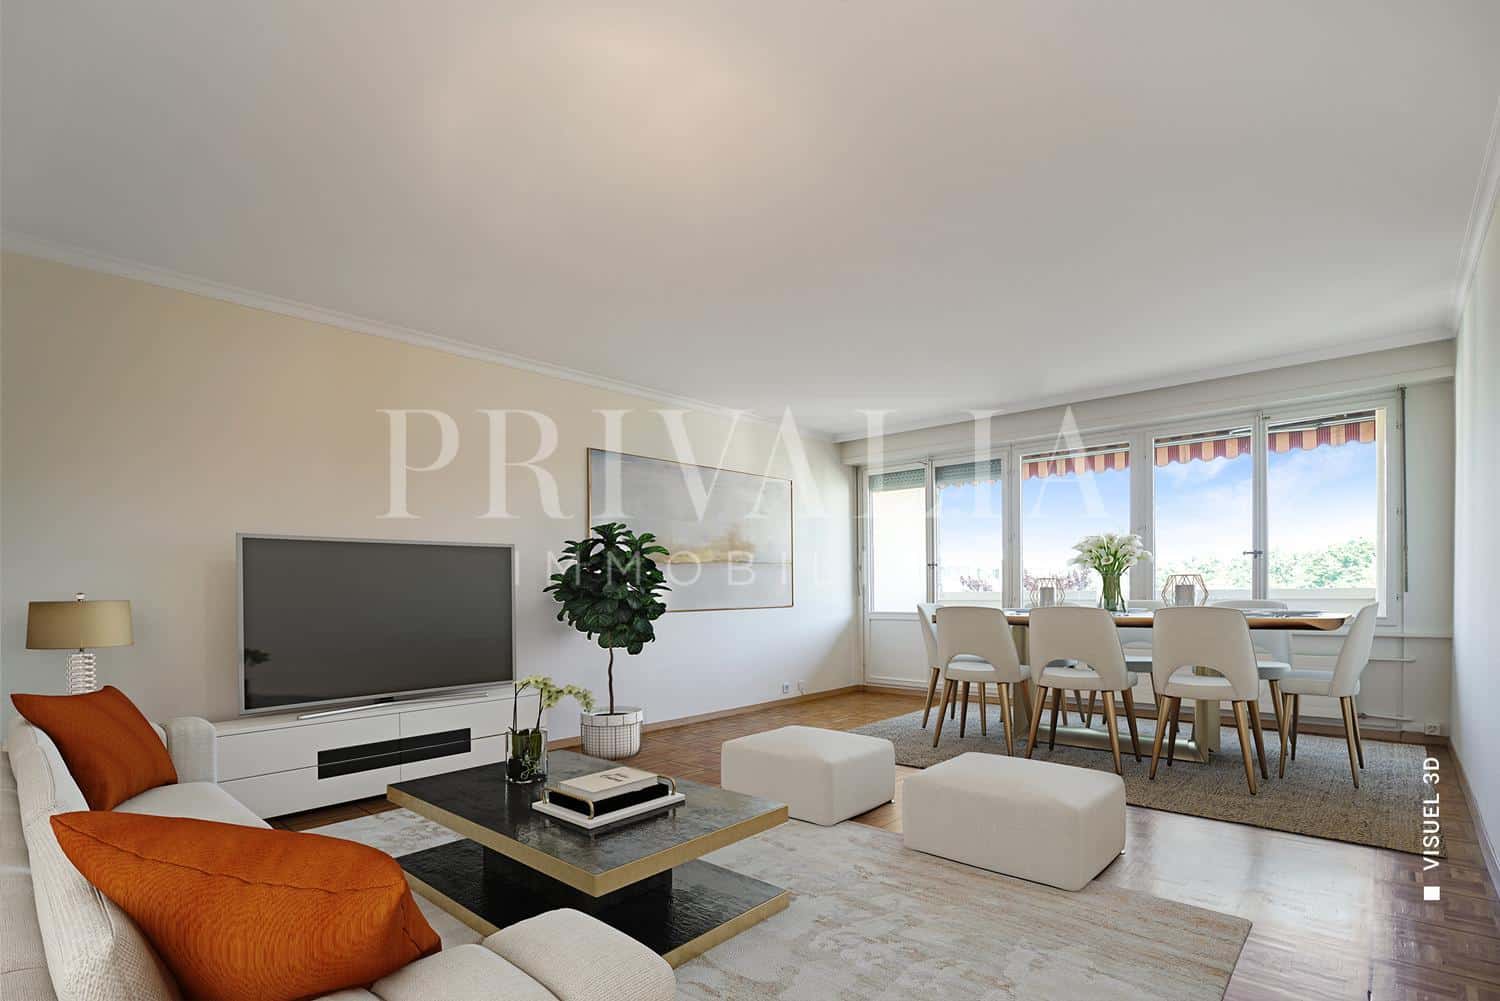 PrivaliaBeautiful bright apartment with balcony in the heart of Champel